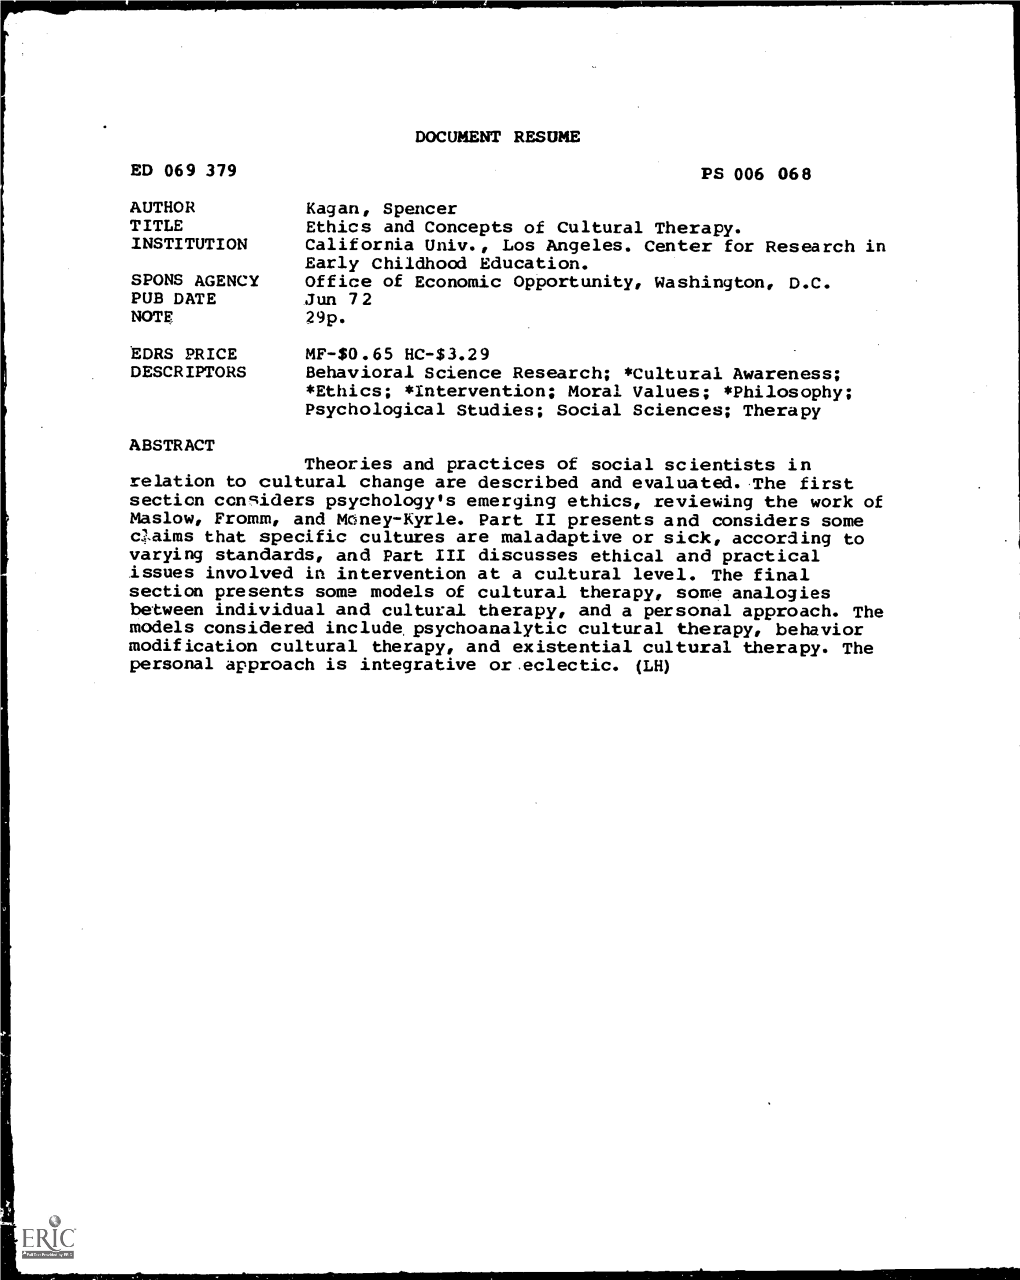 DOCUMENT RESUME PS 006 068 Jun 72 Psychological Studies; Social Sciences; Therapy Theories and Practices of Social Scientists In